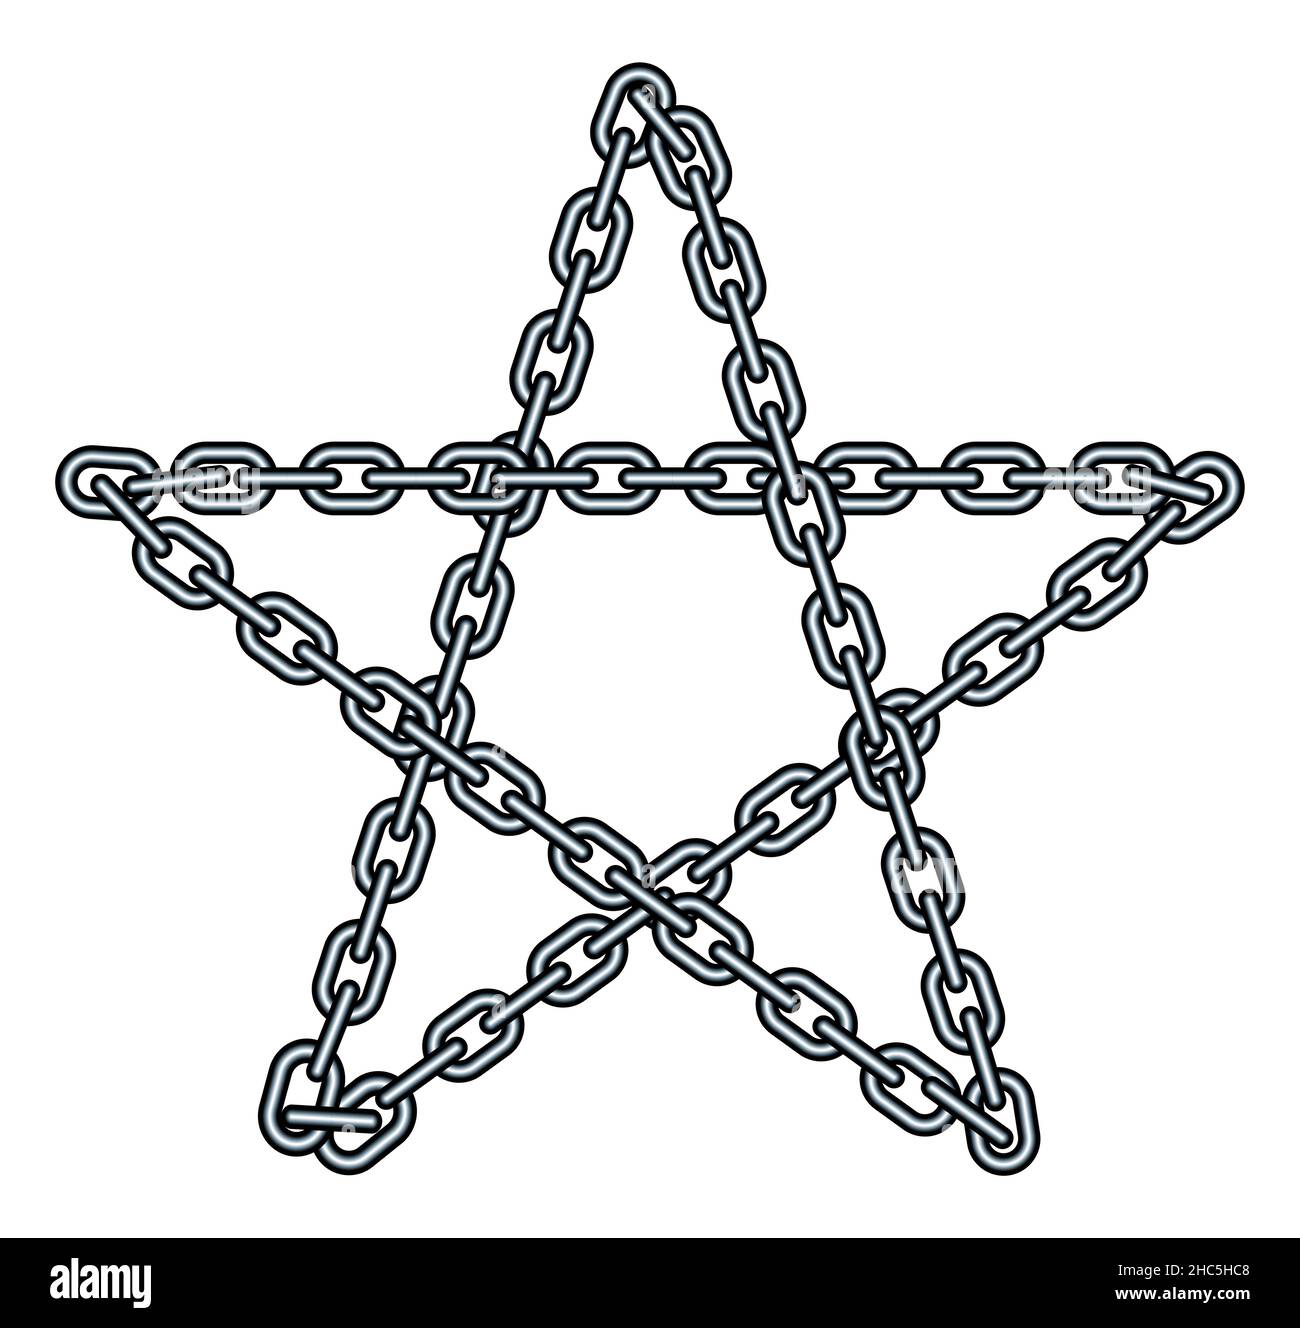 Illustration Of The Abstract Steel Chain Five Pointed Star Stock Vector